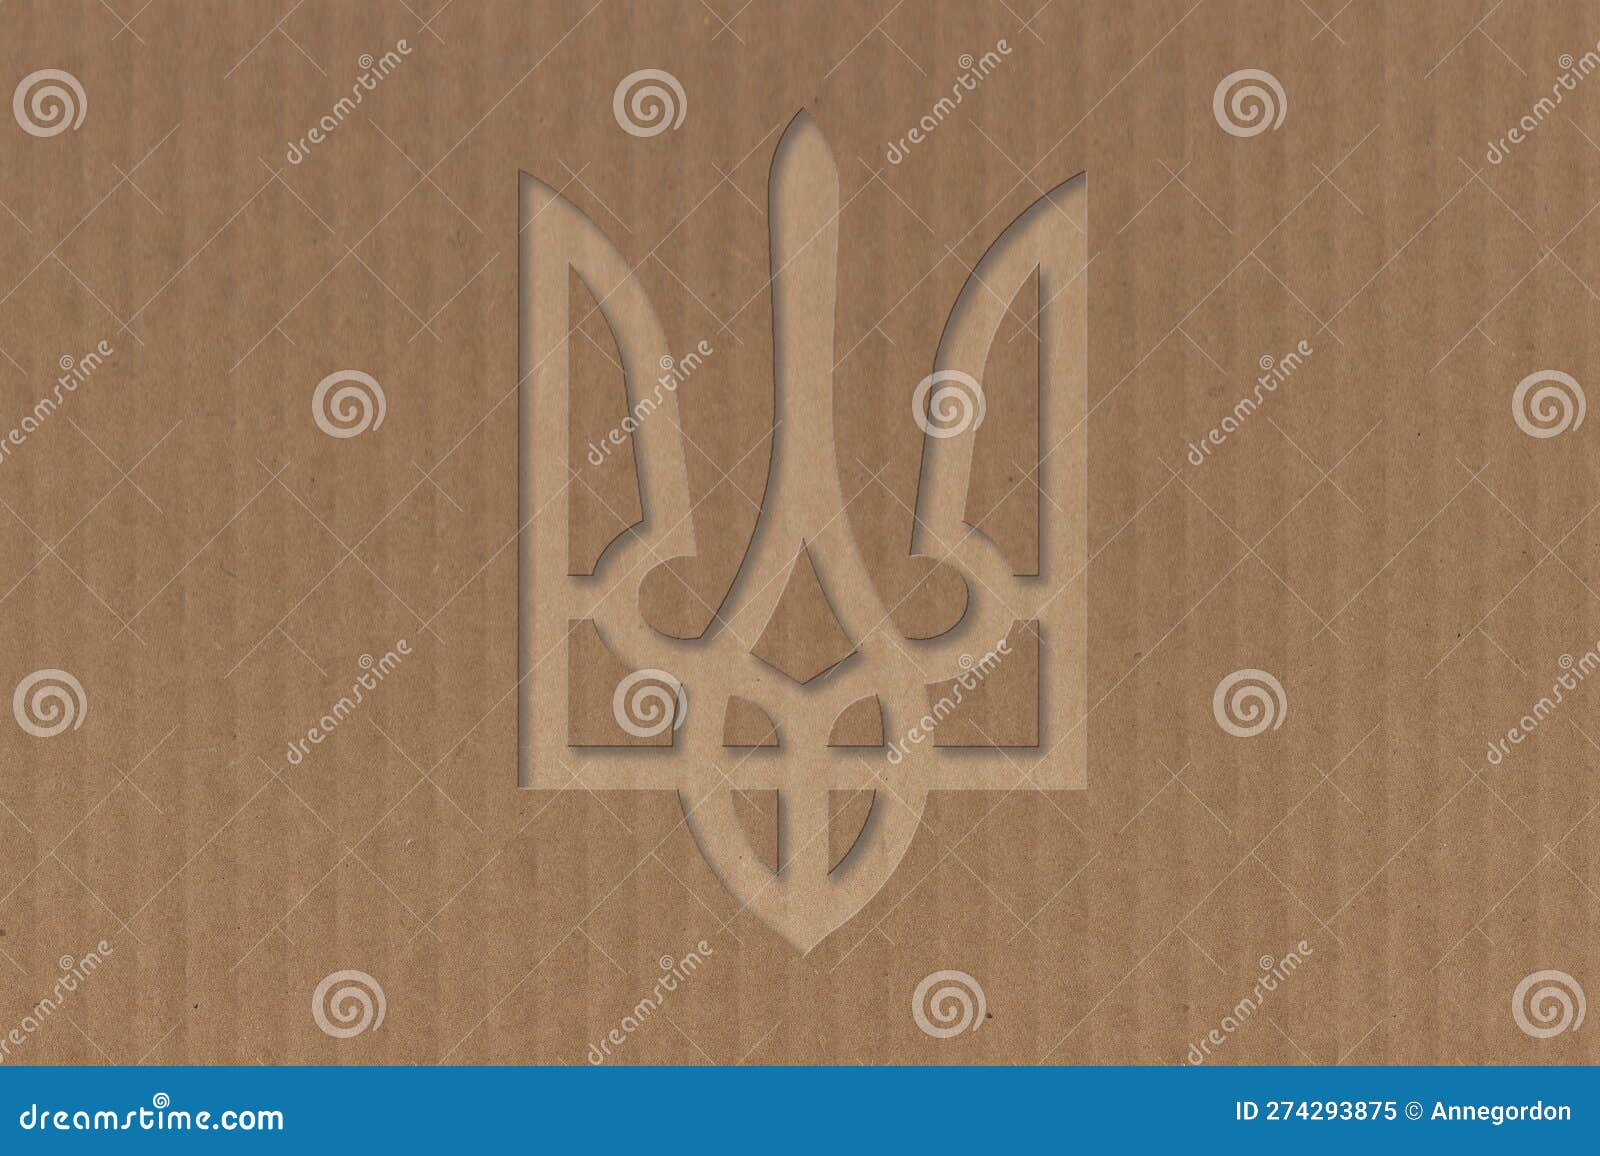 coat of arms of ukraine cut out on cardboard